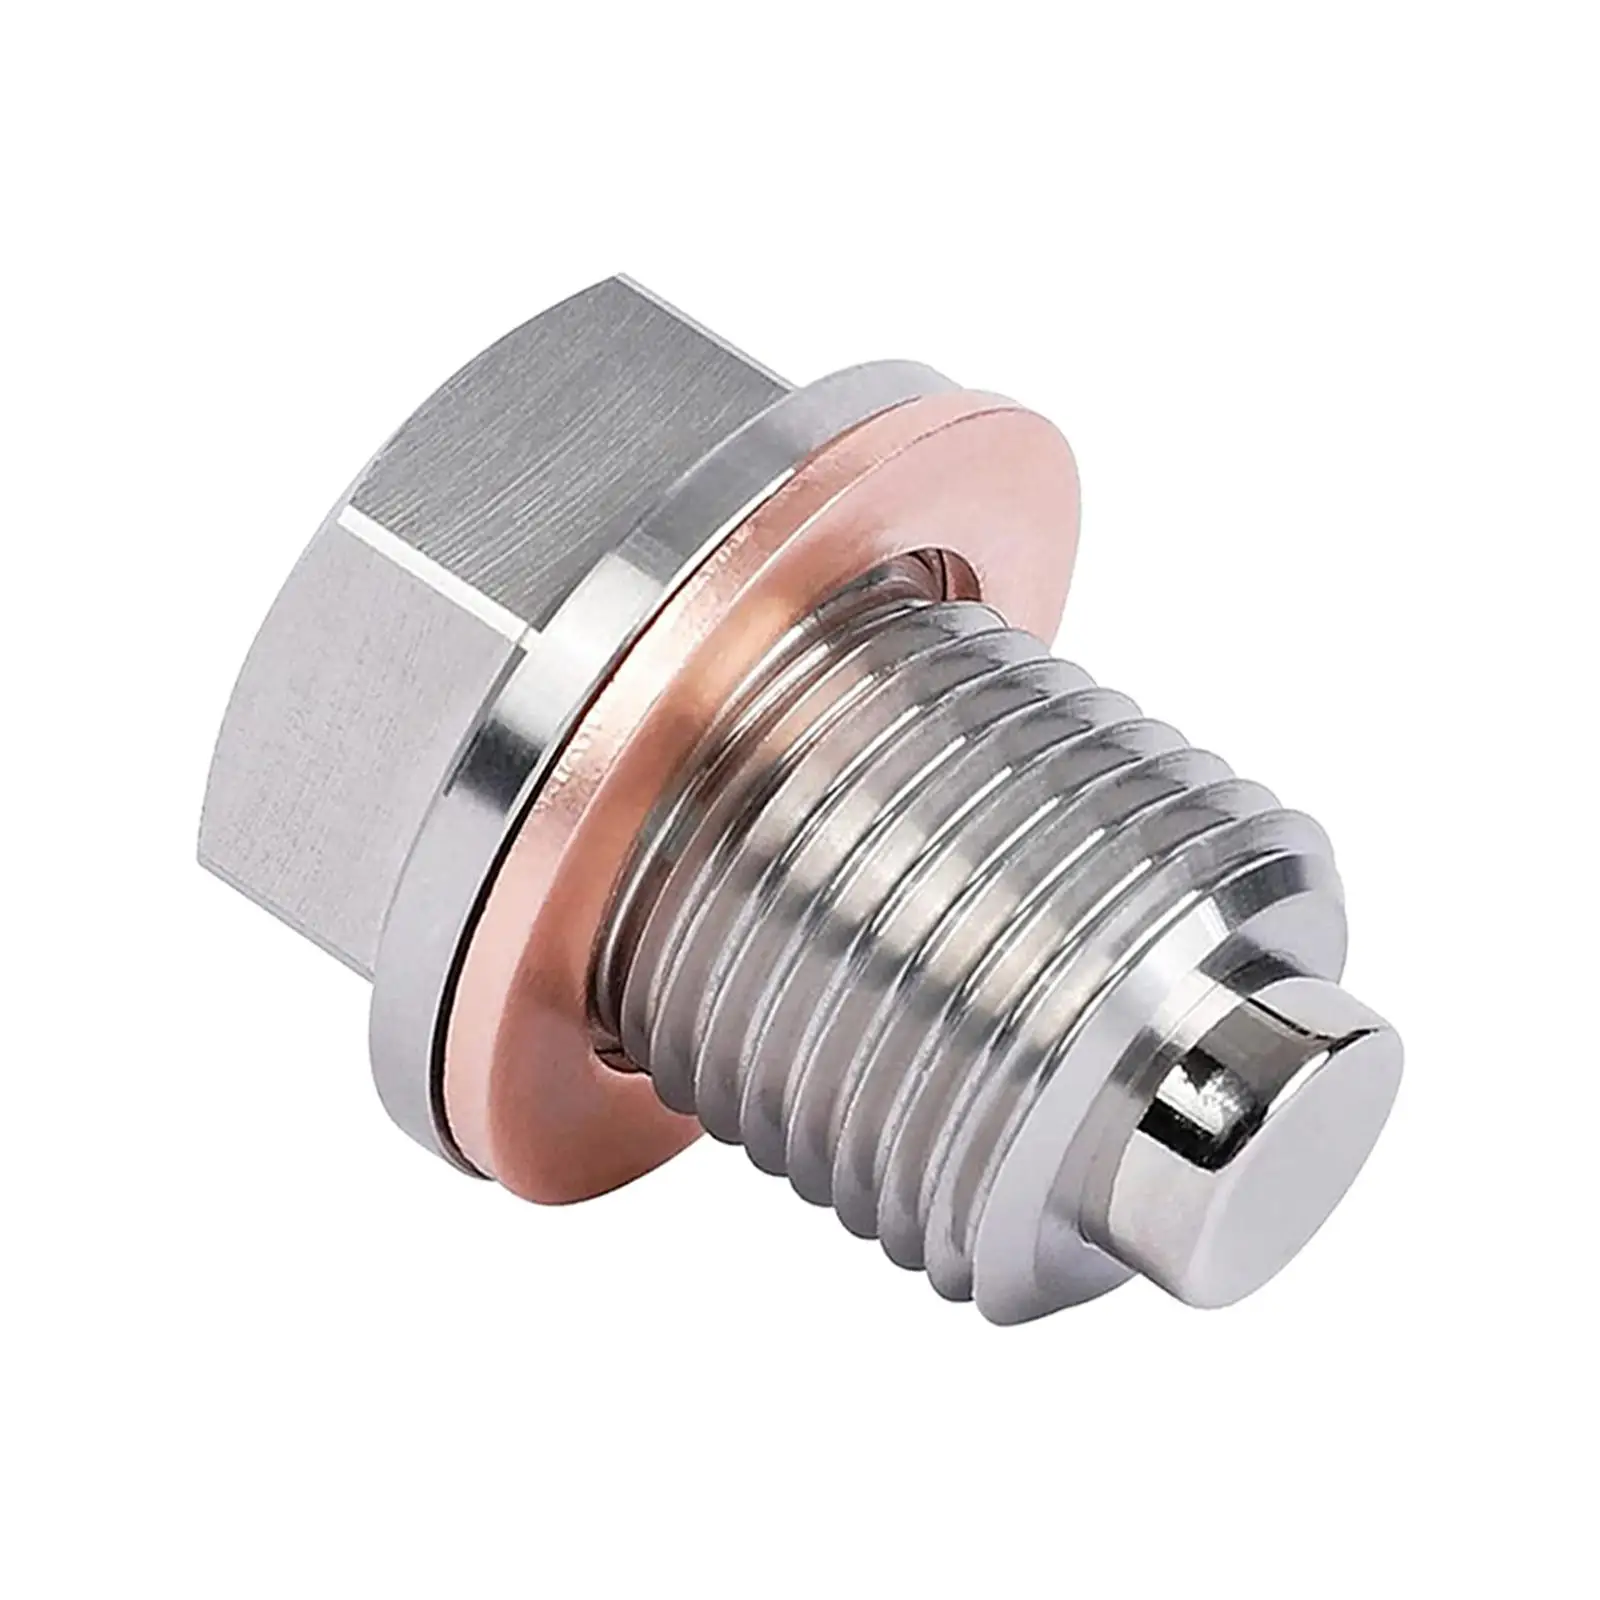 Oil Drain Plug M14x1.5 Replace Easy to Install Engine Oil Pan Protection Plug Neodymium Magnet Bolt for Motorcycle Car